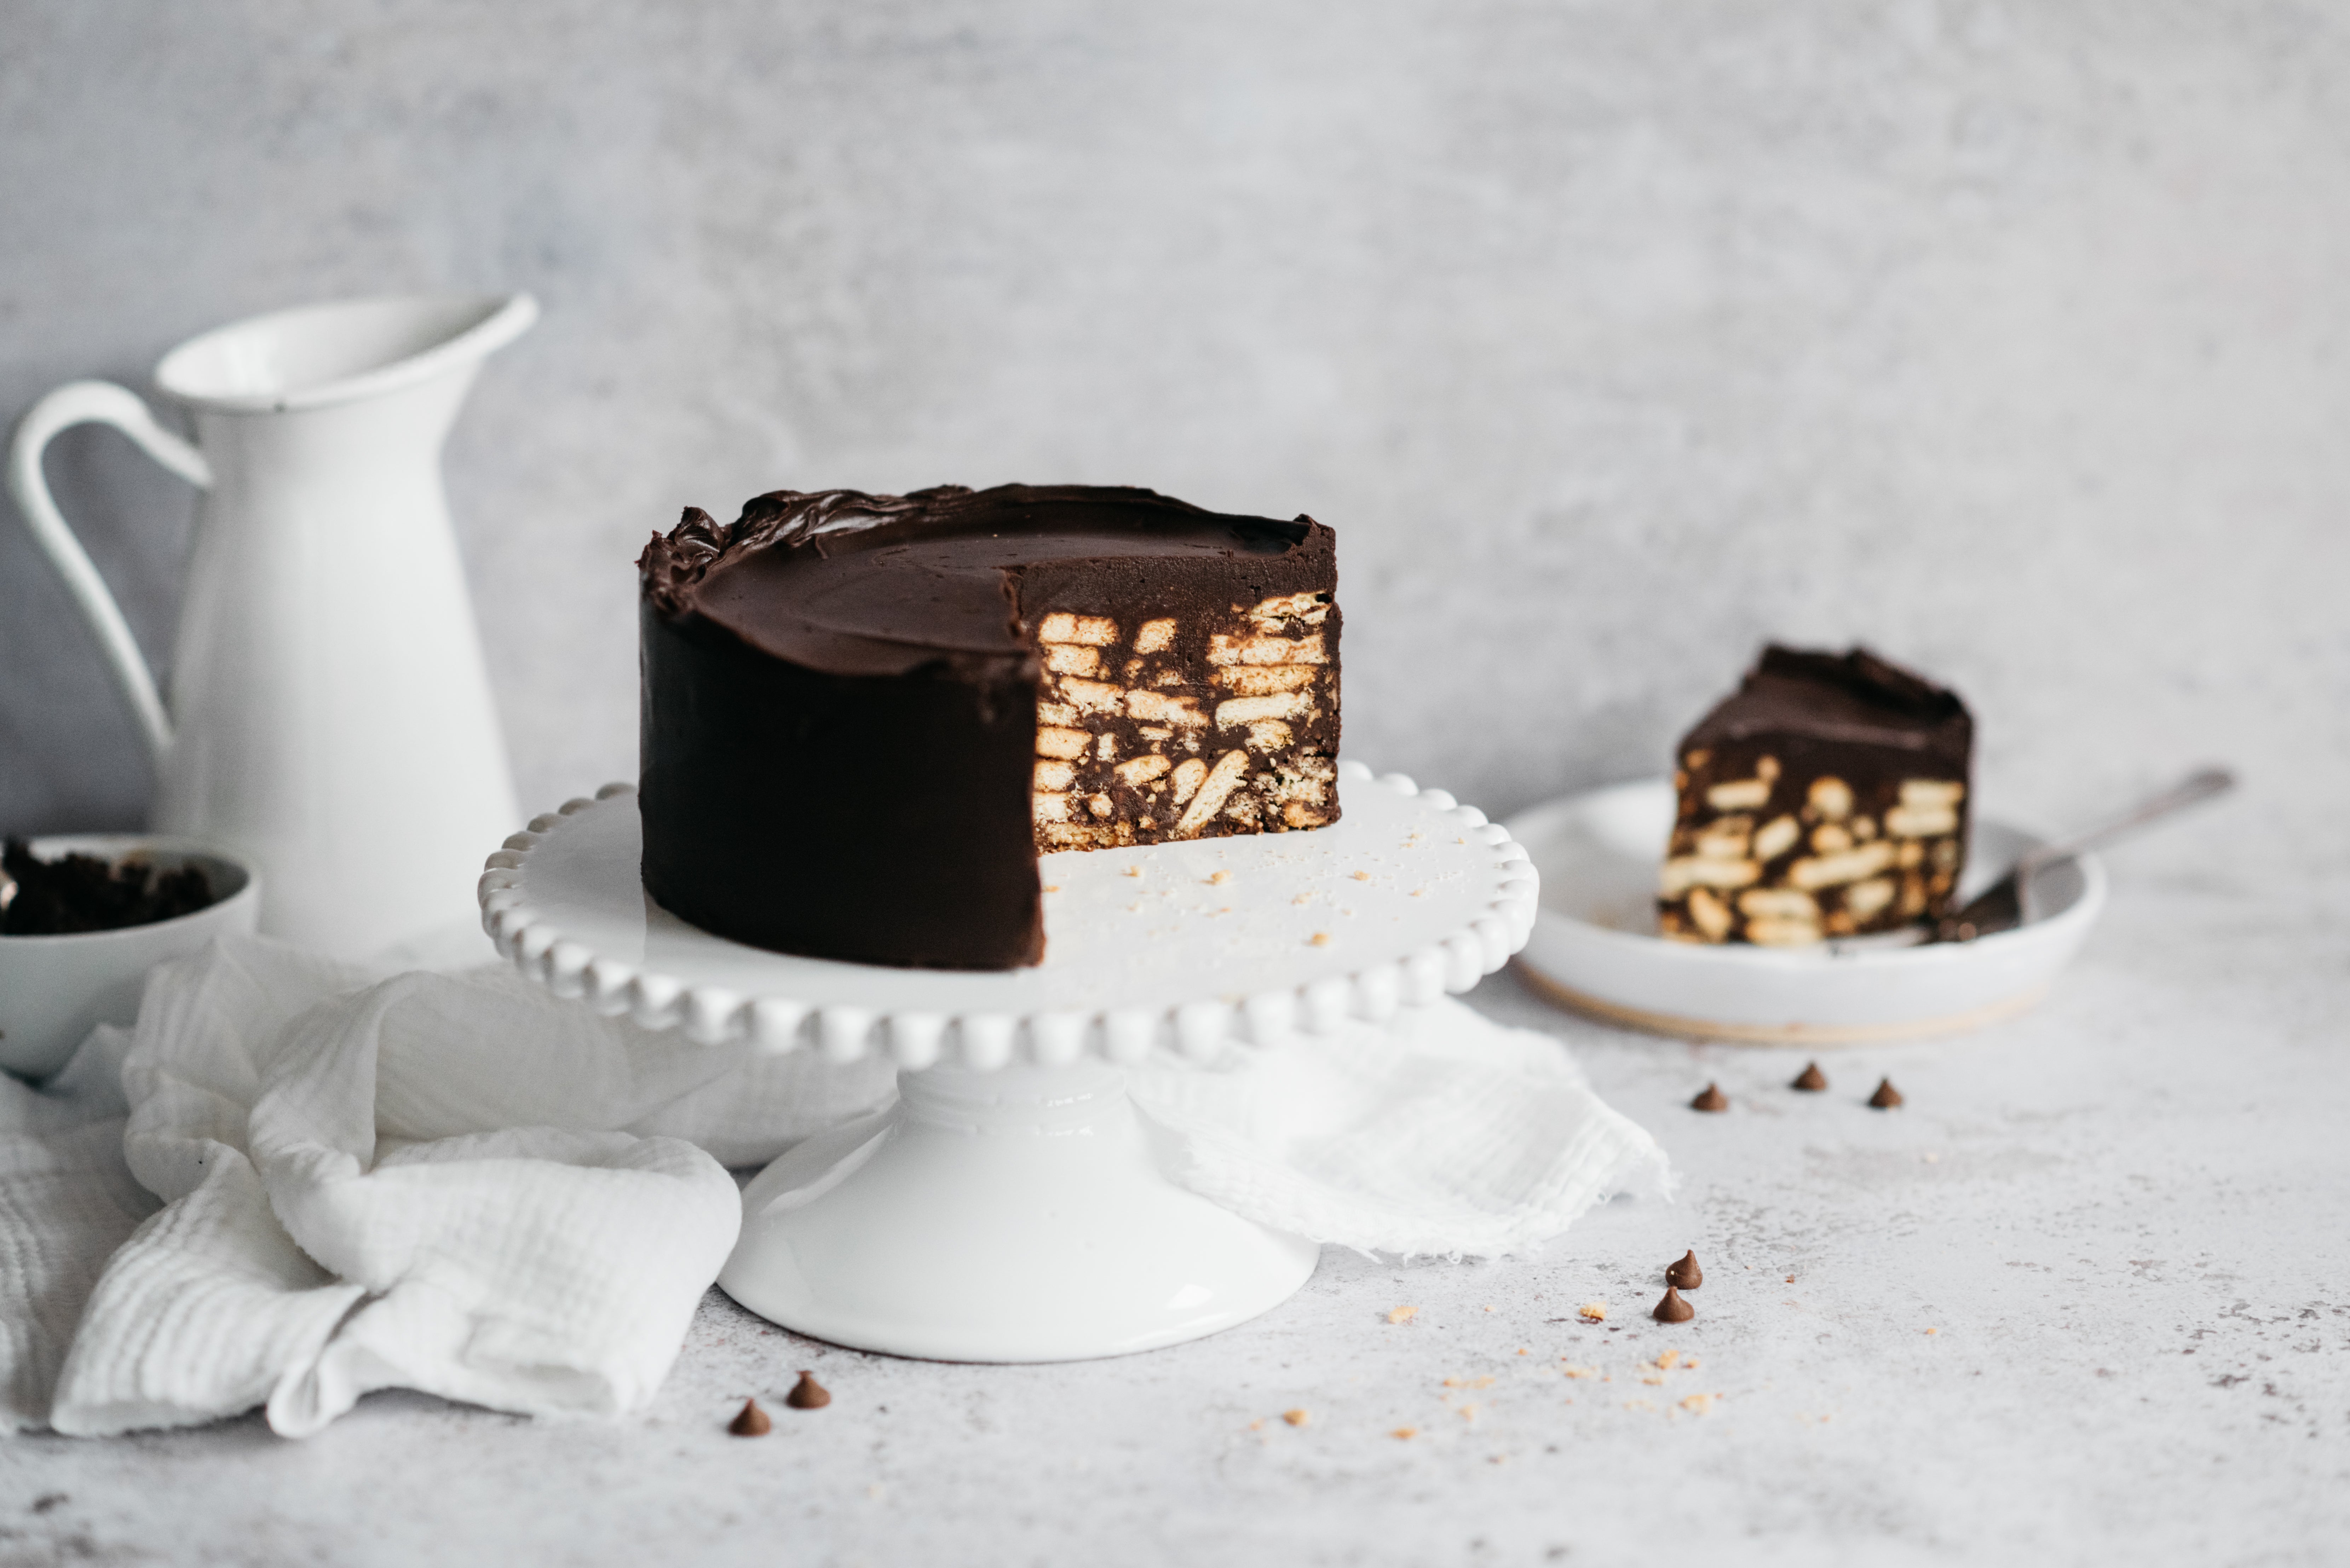 This Easter, make a no-bake, no-egg, no-fuss Chocolate Crunch Cake |  Food-wine News - The Indian Express